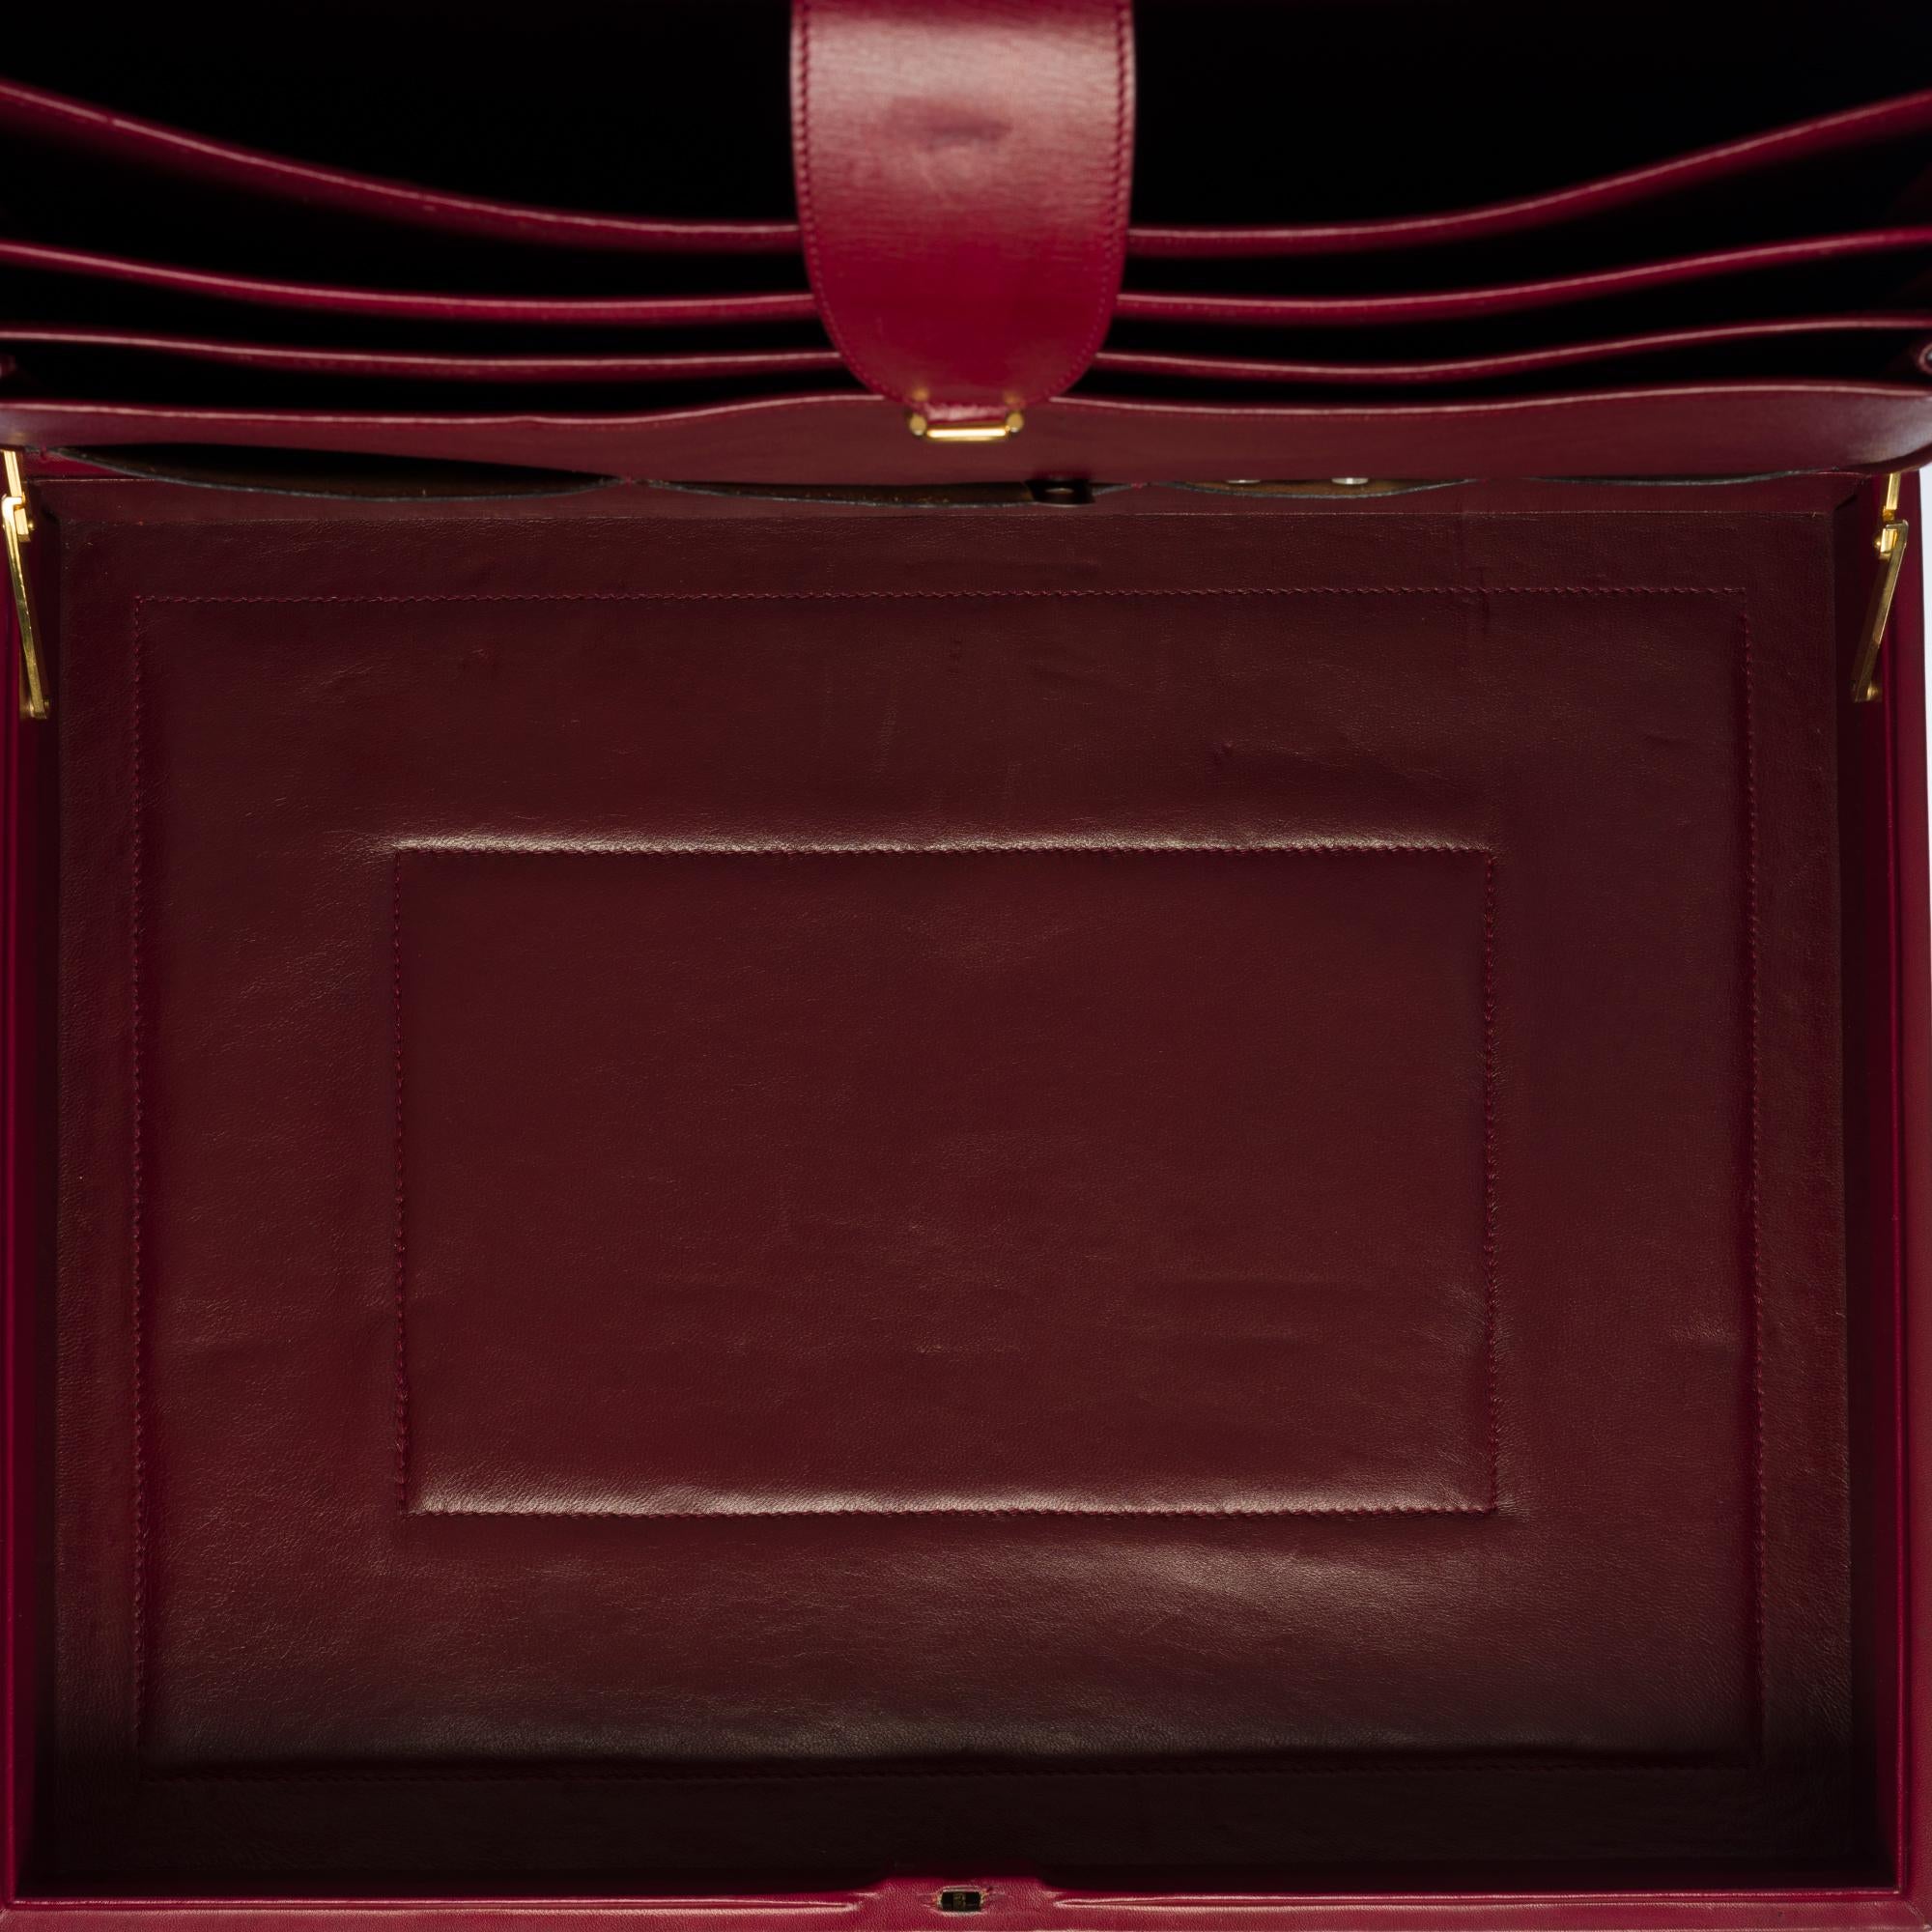 Women's or Men's Rare Cartier Attaché Case in burgundy leather and gold hardware